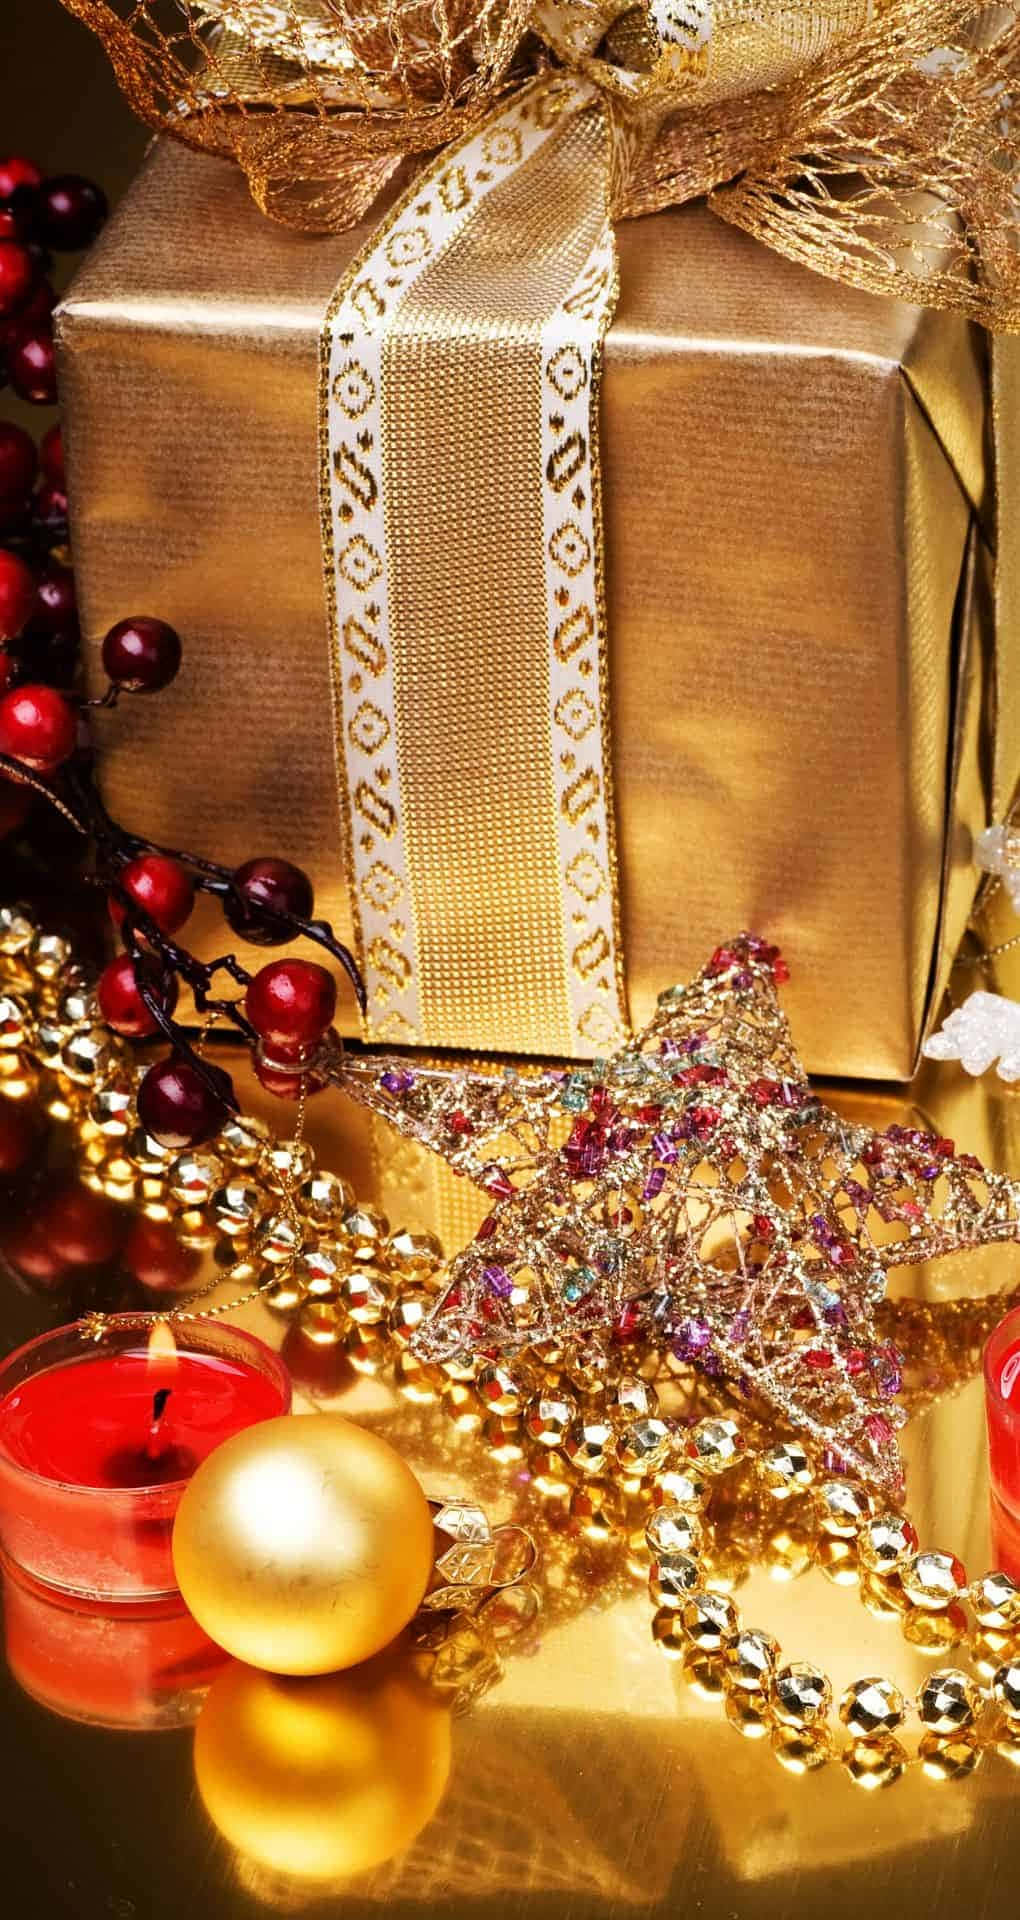 Iphone Christmas Aesthetic Gold Presents Wallpaper